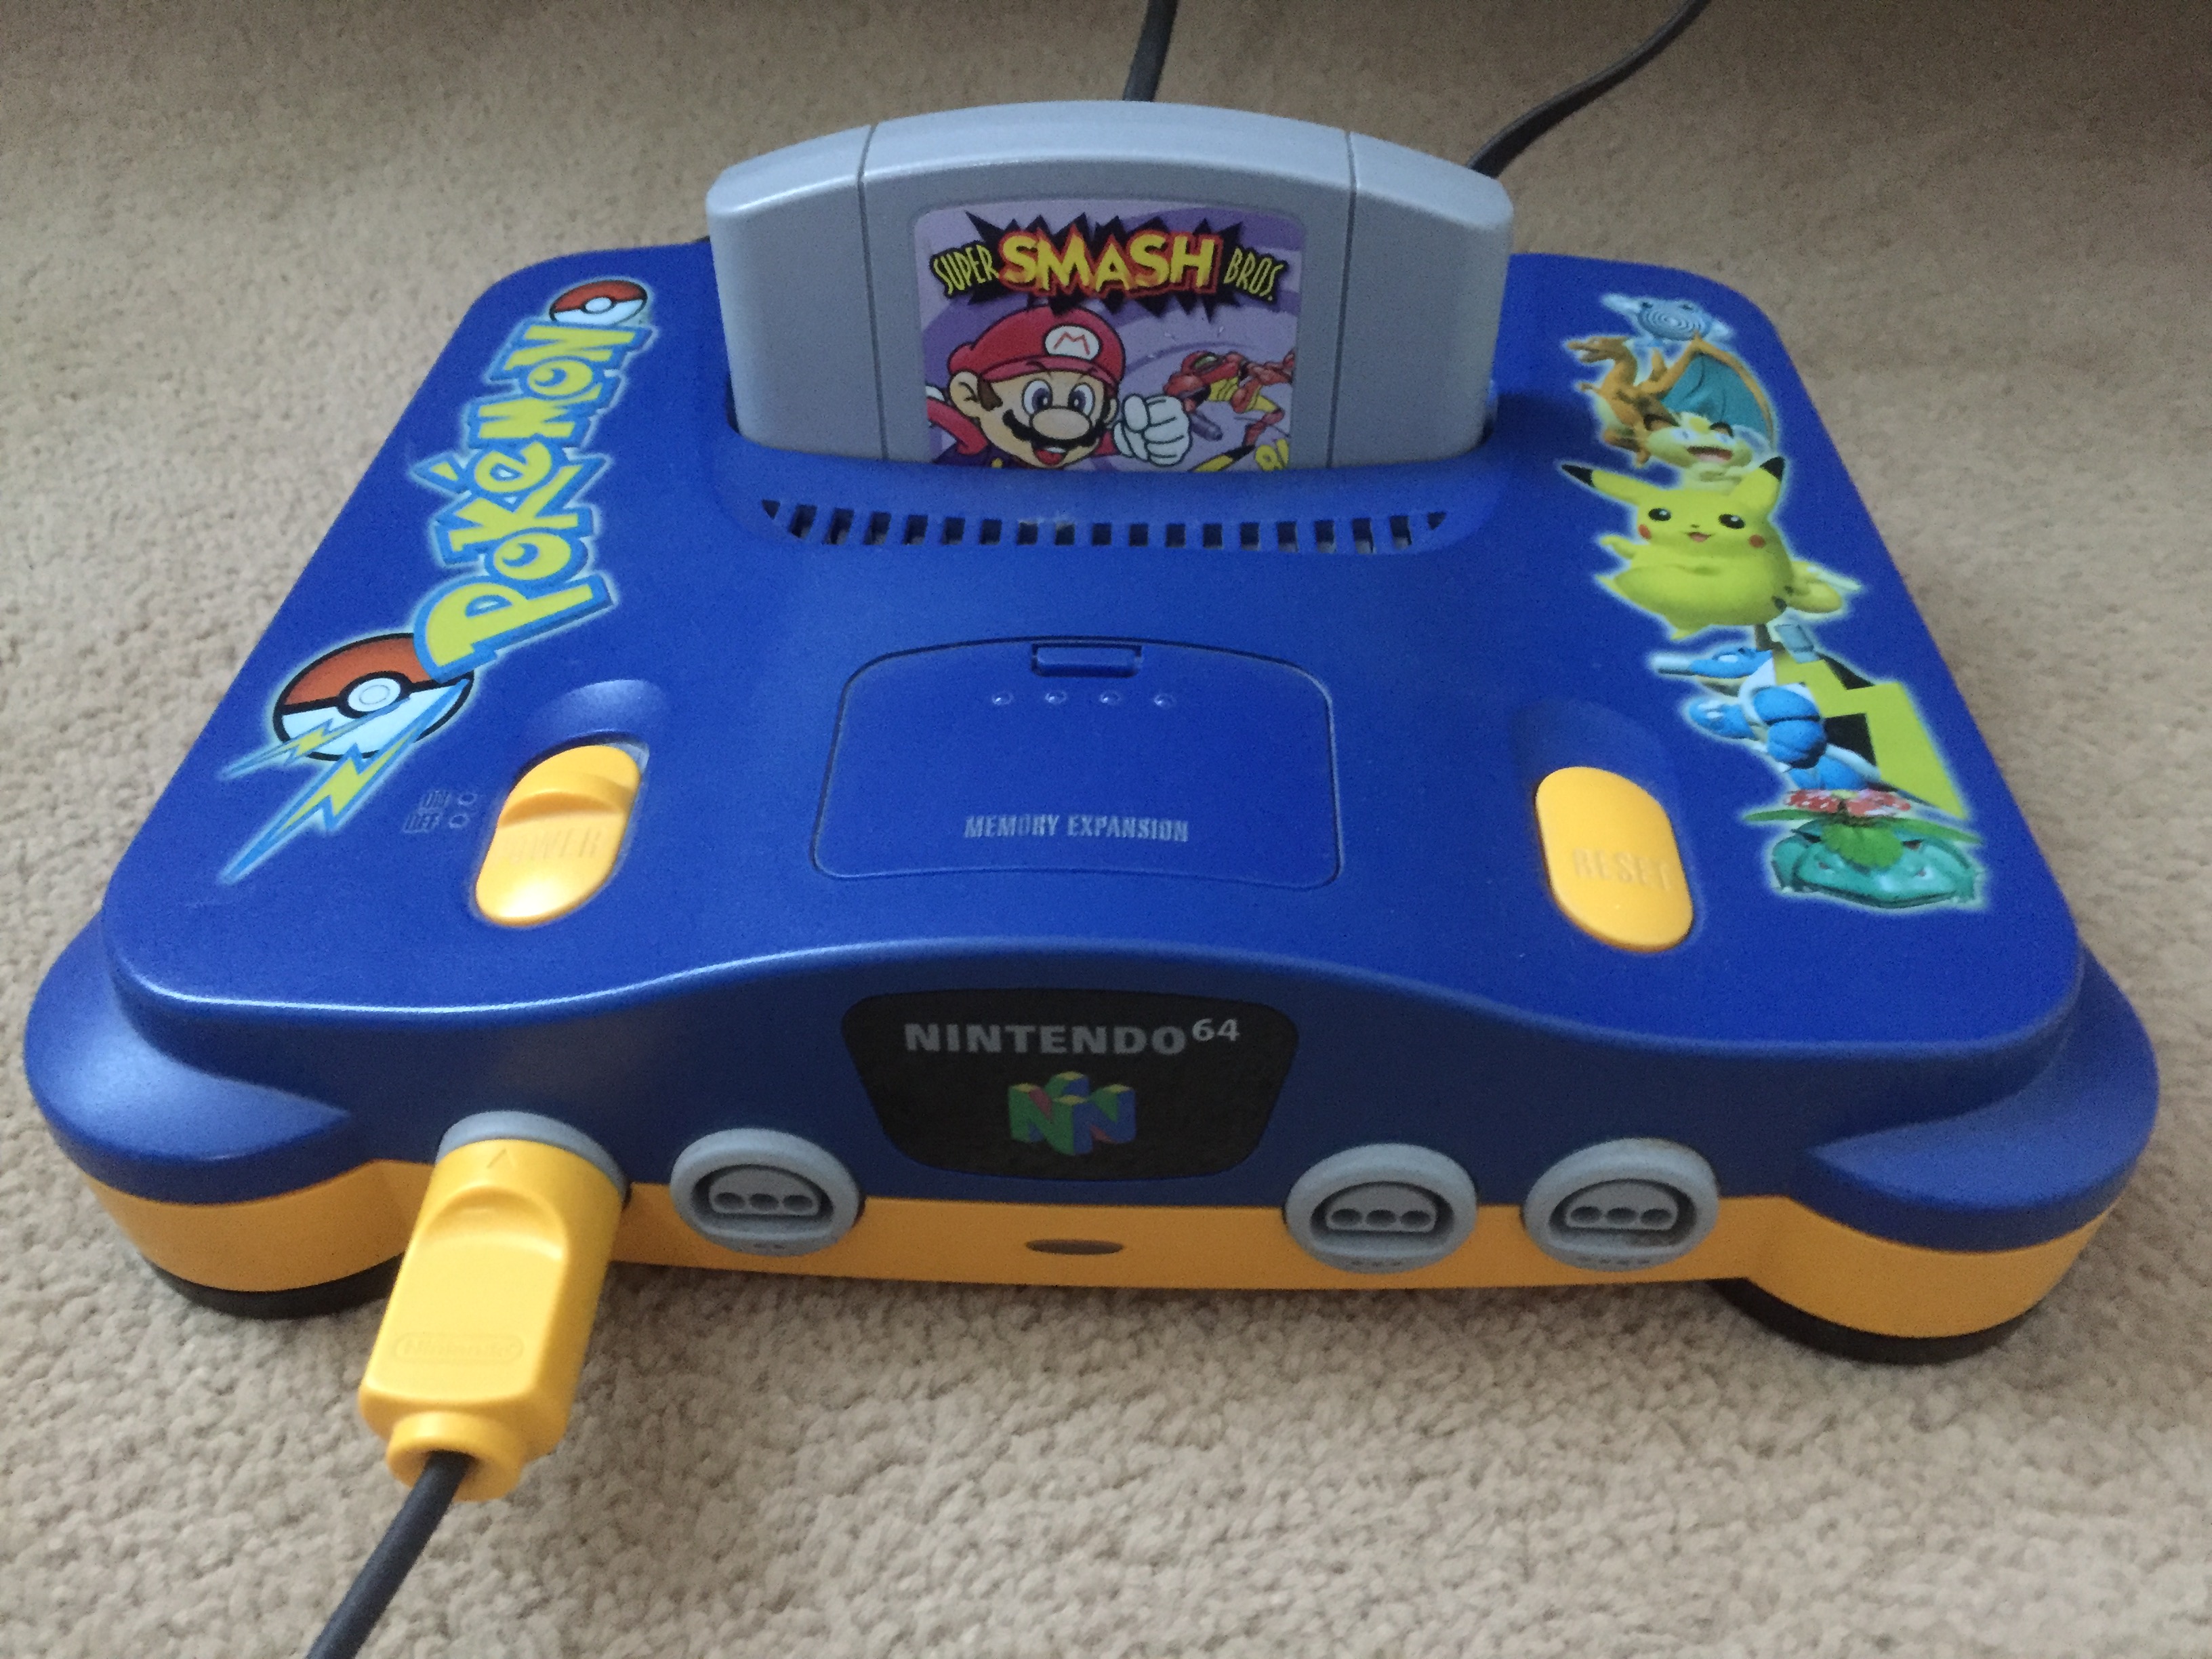 A Nintendo 64 console with the Super Msash Bros cartridge plugged in. The console is a Pokémon Stadium special edition. The upper half is blue, the bottom yellow. The Pokémon logo is on the left on the top of the console and several 3D renderings of Pokémon on the right.